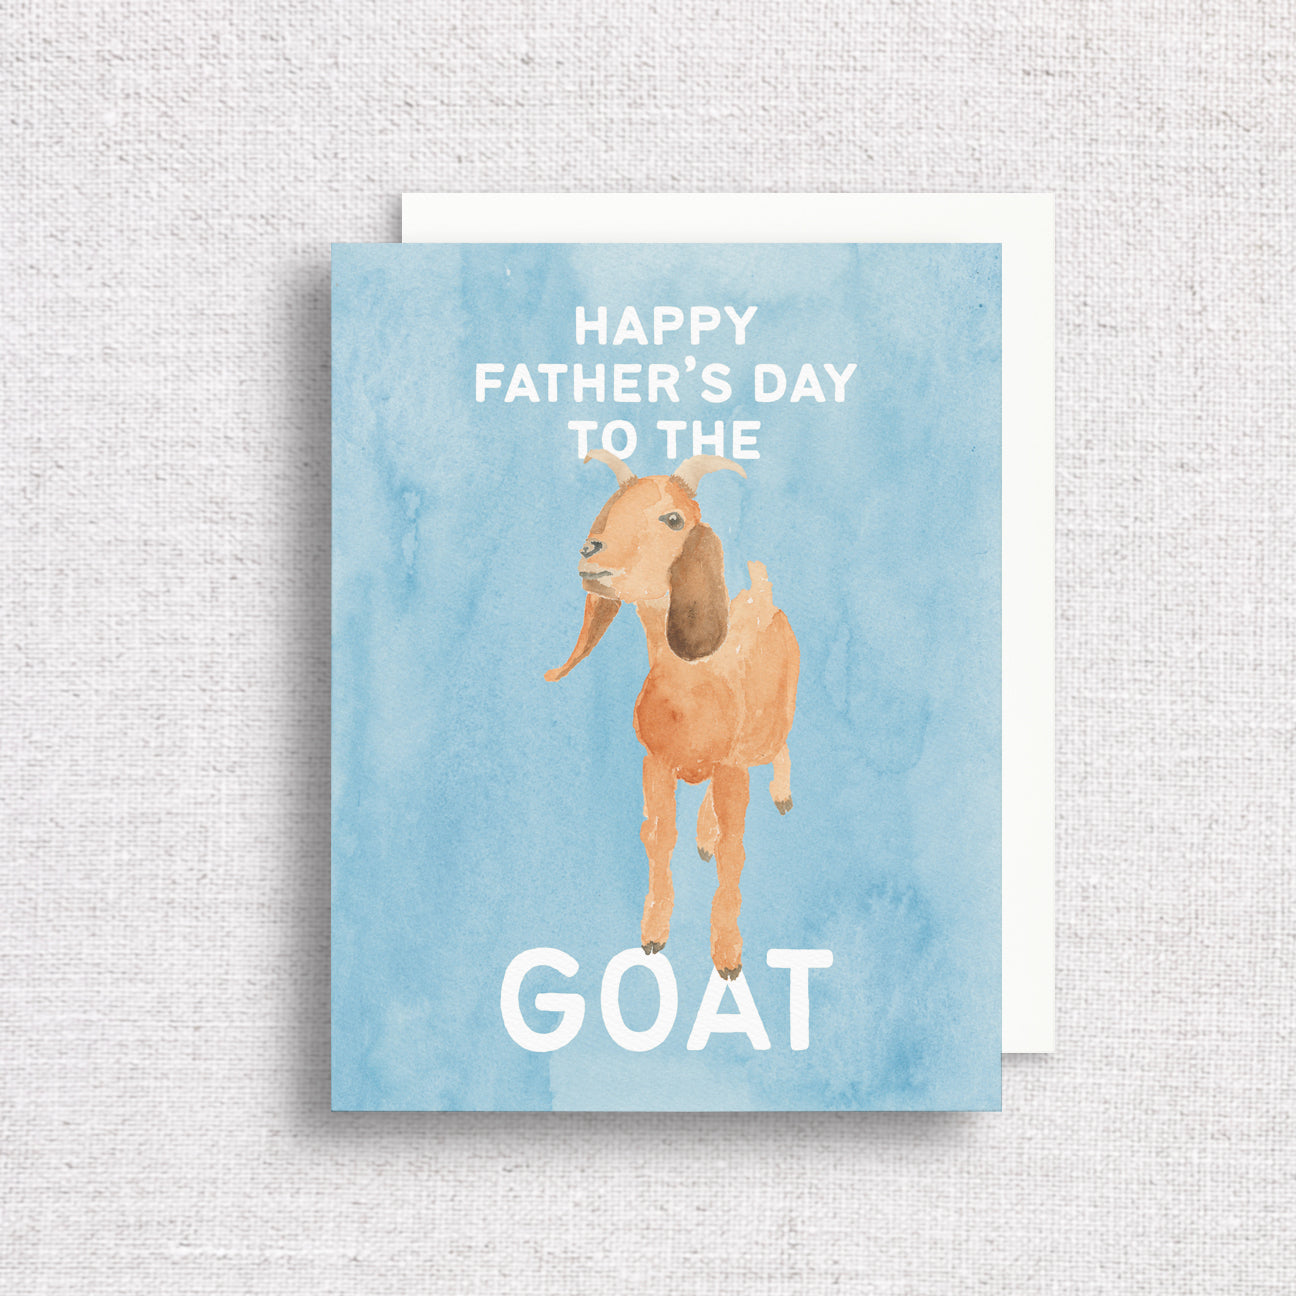 Happy Father's Day to the GOAT Greeting Card by Gert & Co